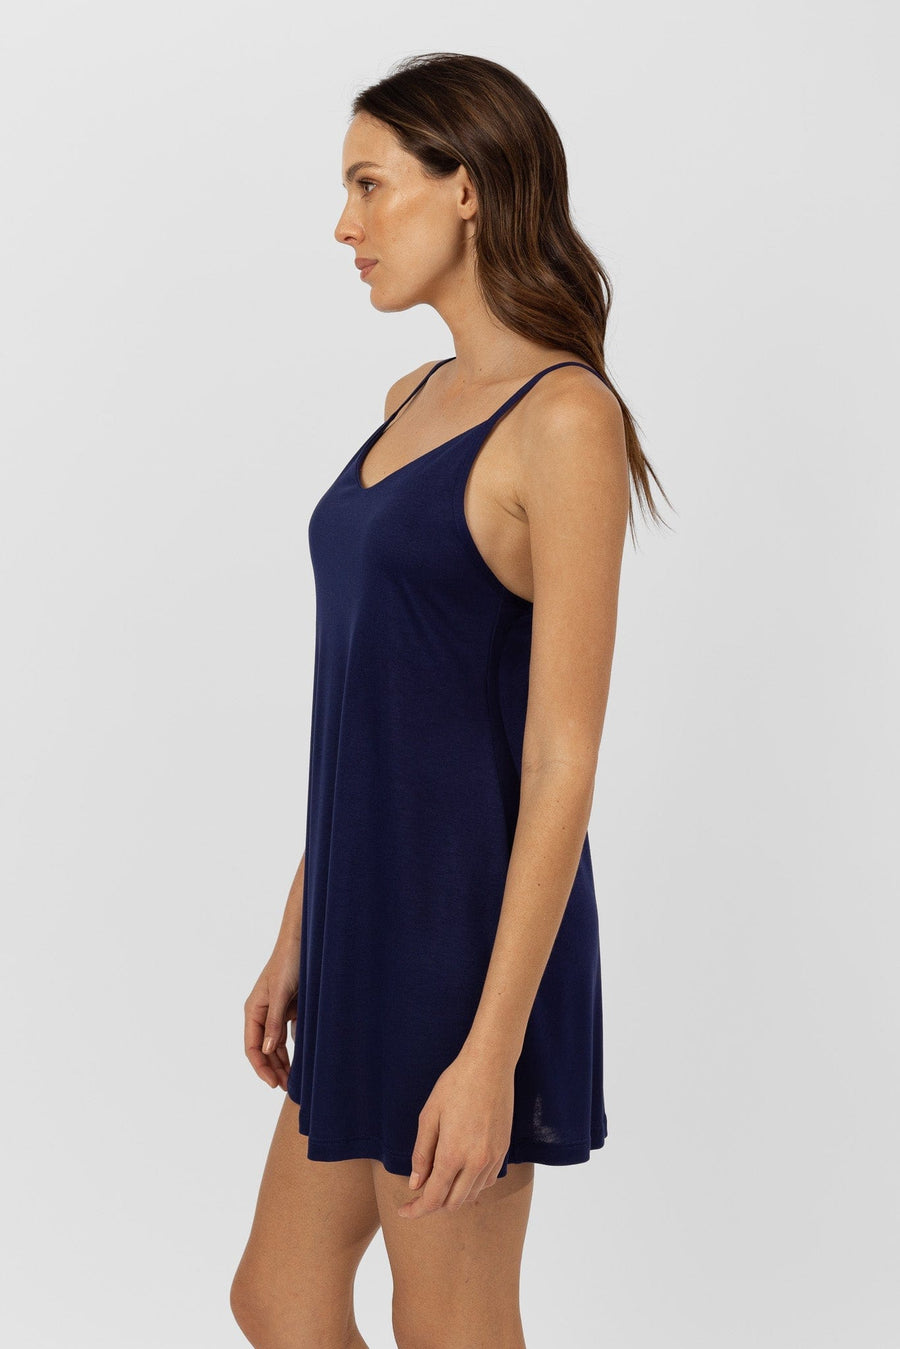 Willow Dress | Navy Nightgowns Australia Online | Reverie the Label  DRESSES Willow Dress